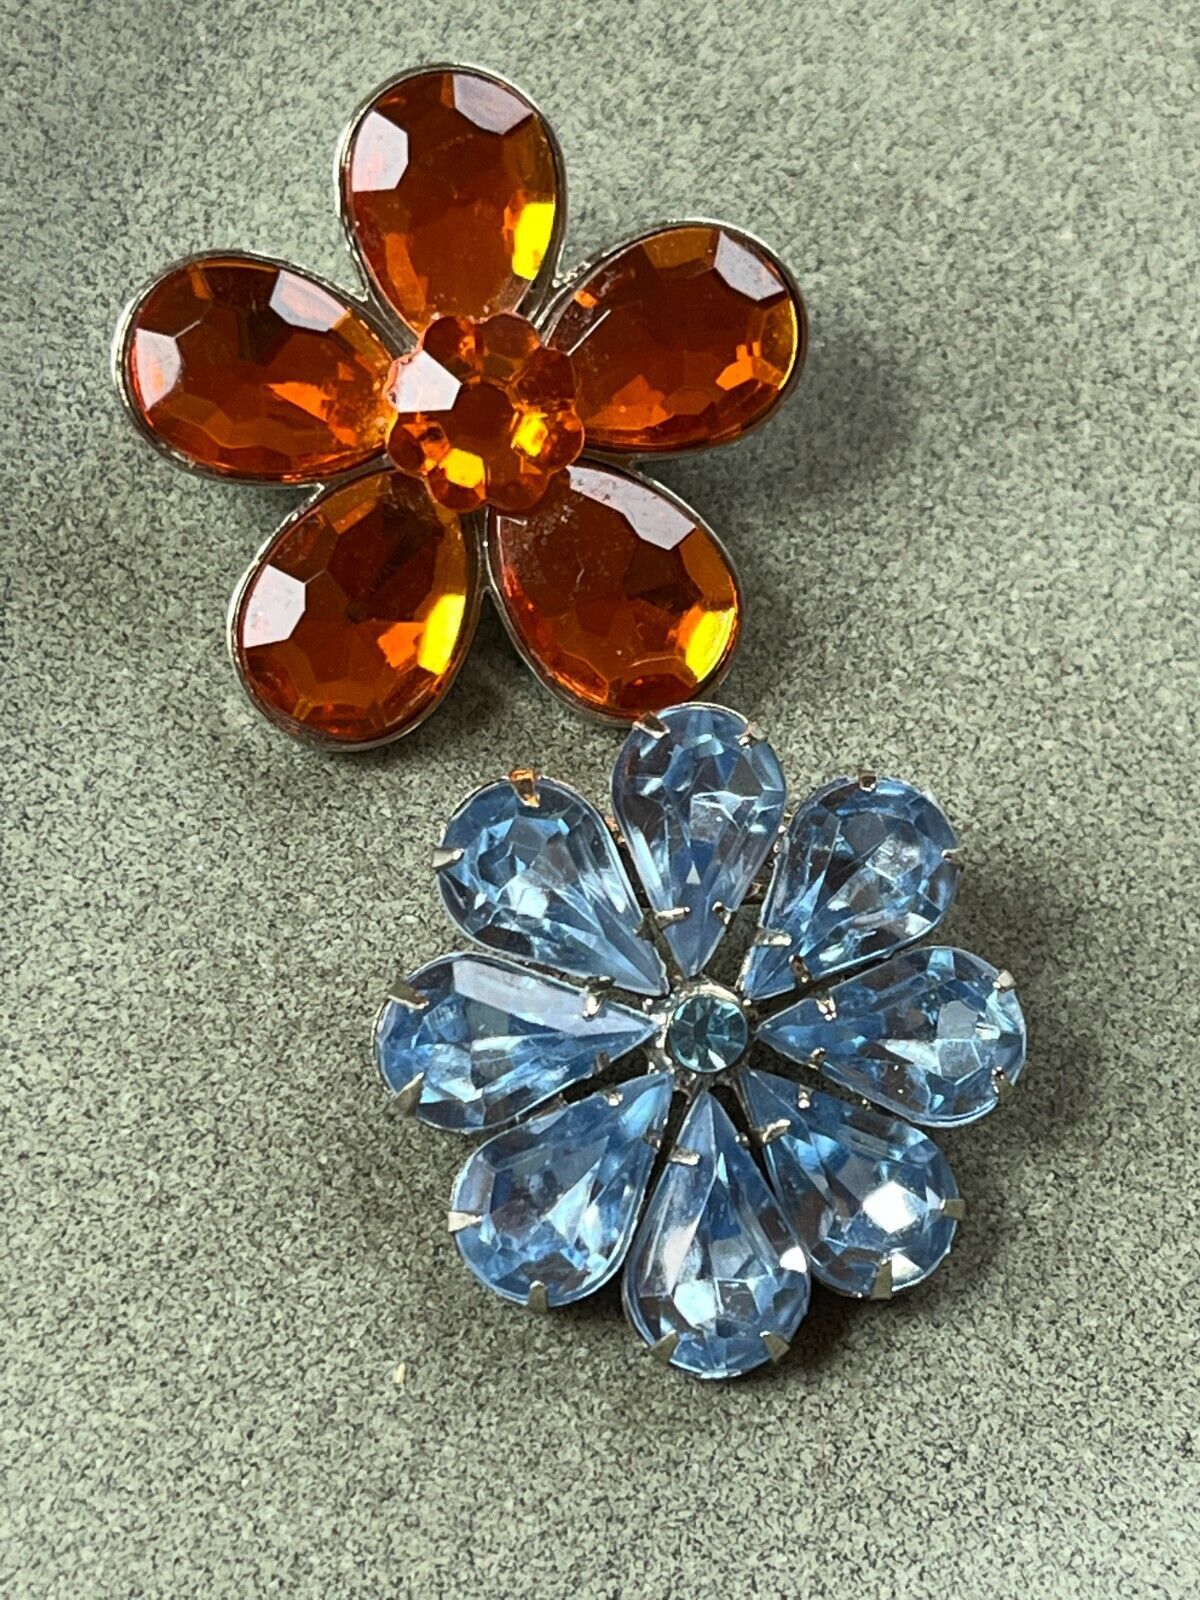 Primary image for Lot of Small Orange or Light Blue Acrylic Rhinestone & SIlvertone FLOWER Brooch